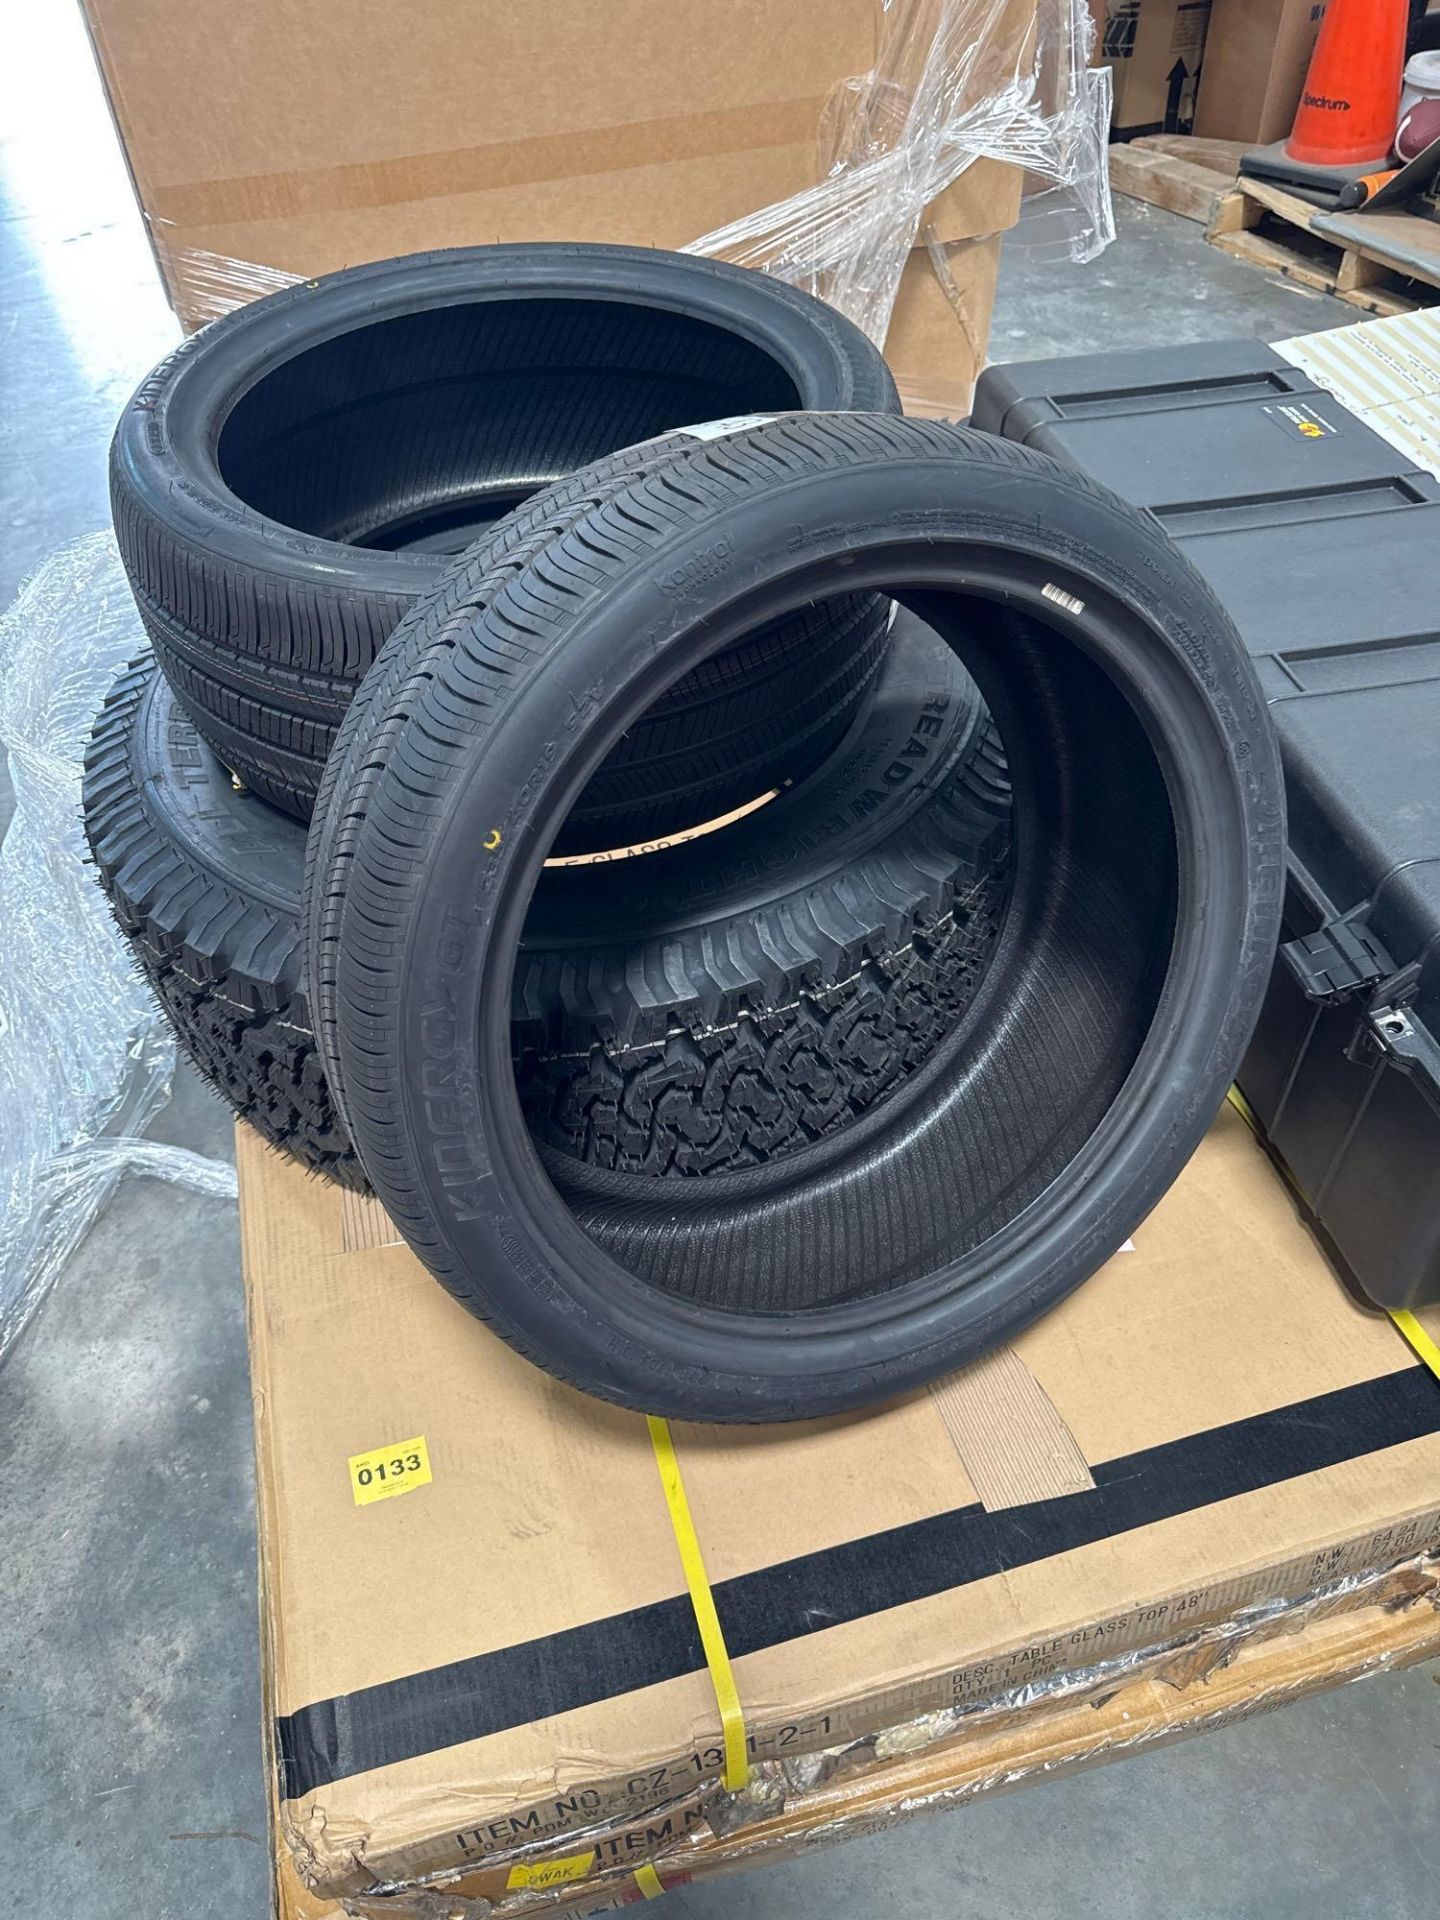 Tires, Pelican 1740 Case, multiple tempered glass tops - Image 3 of 6